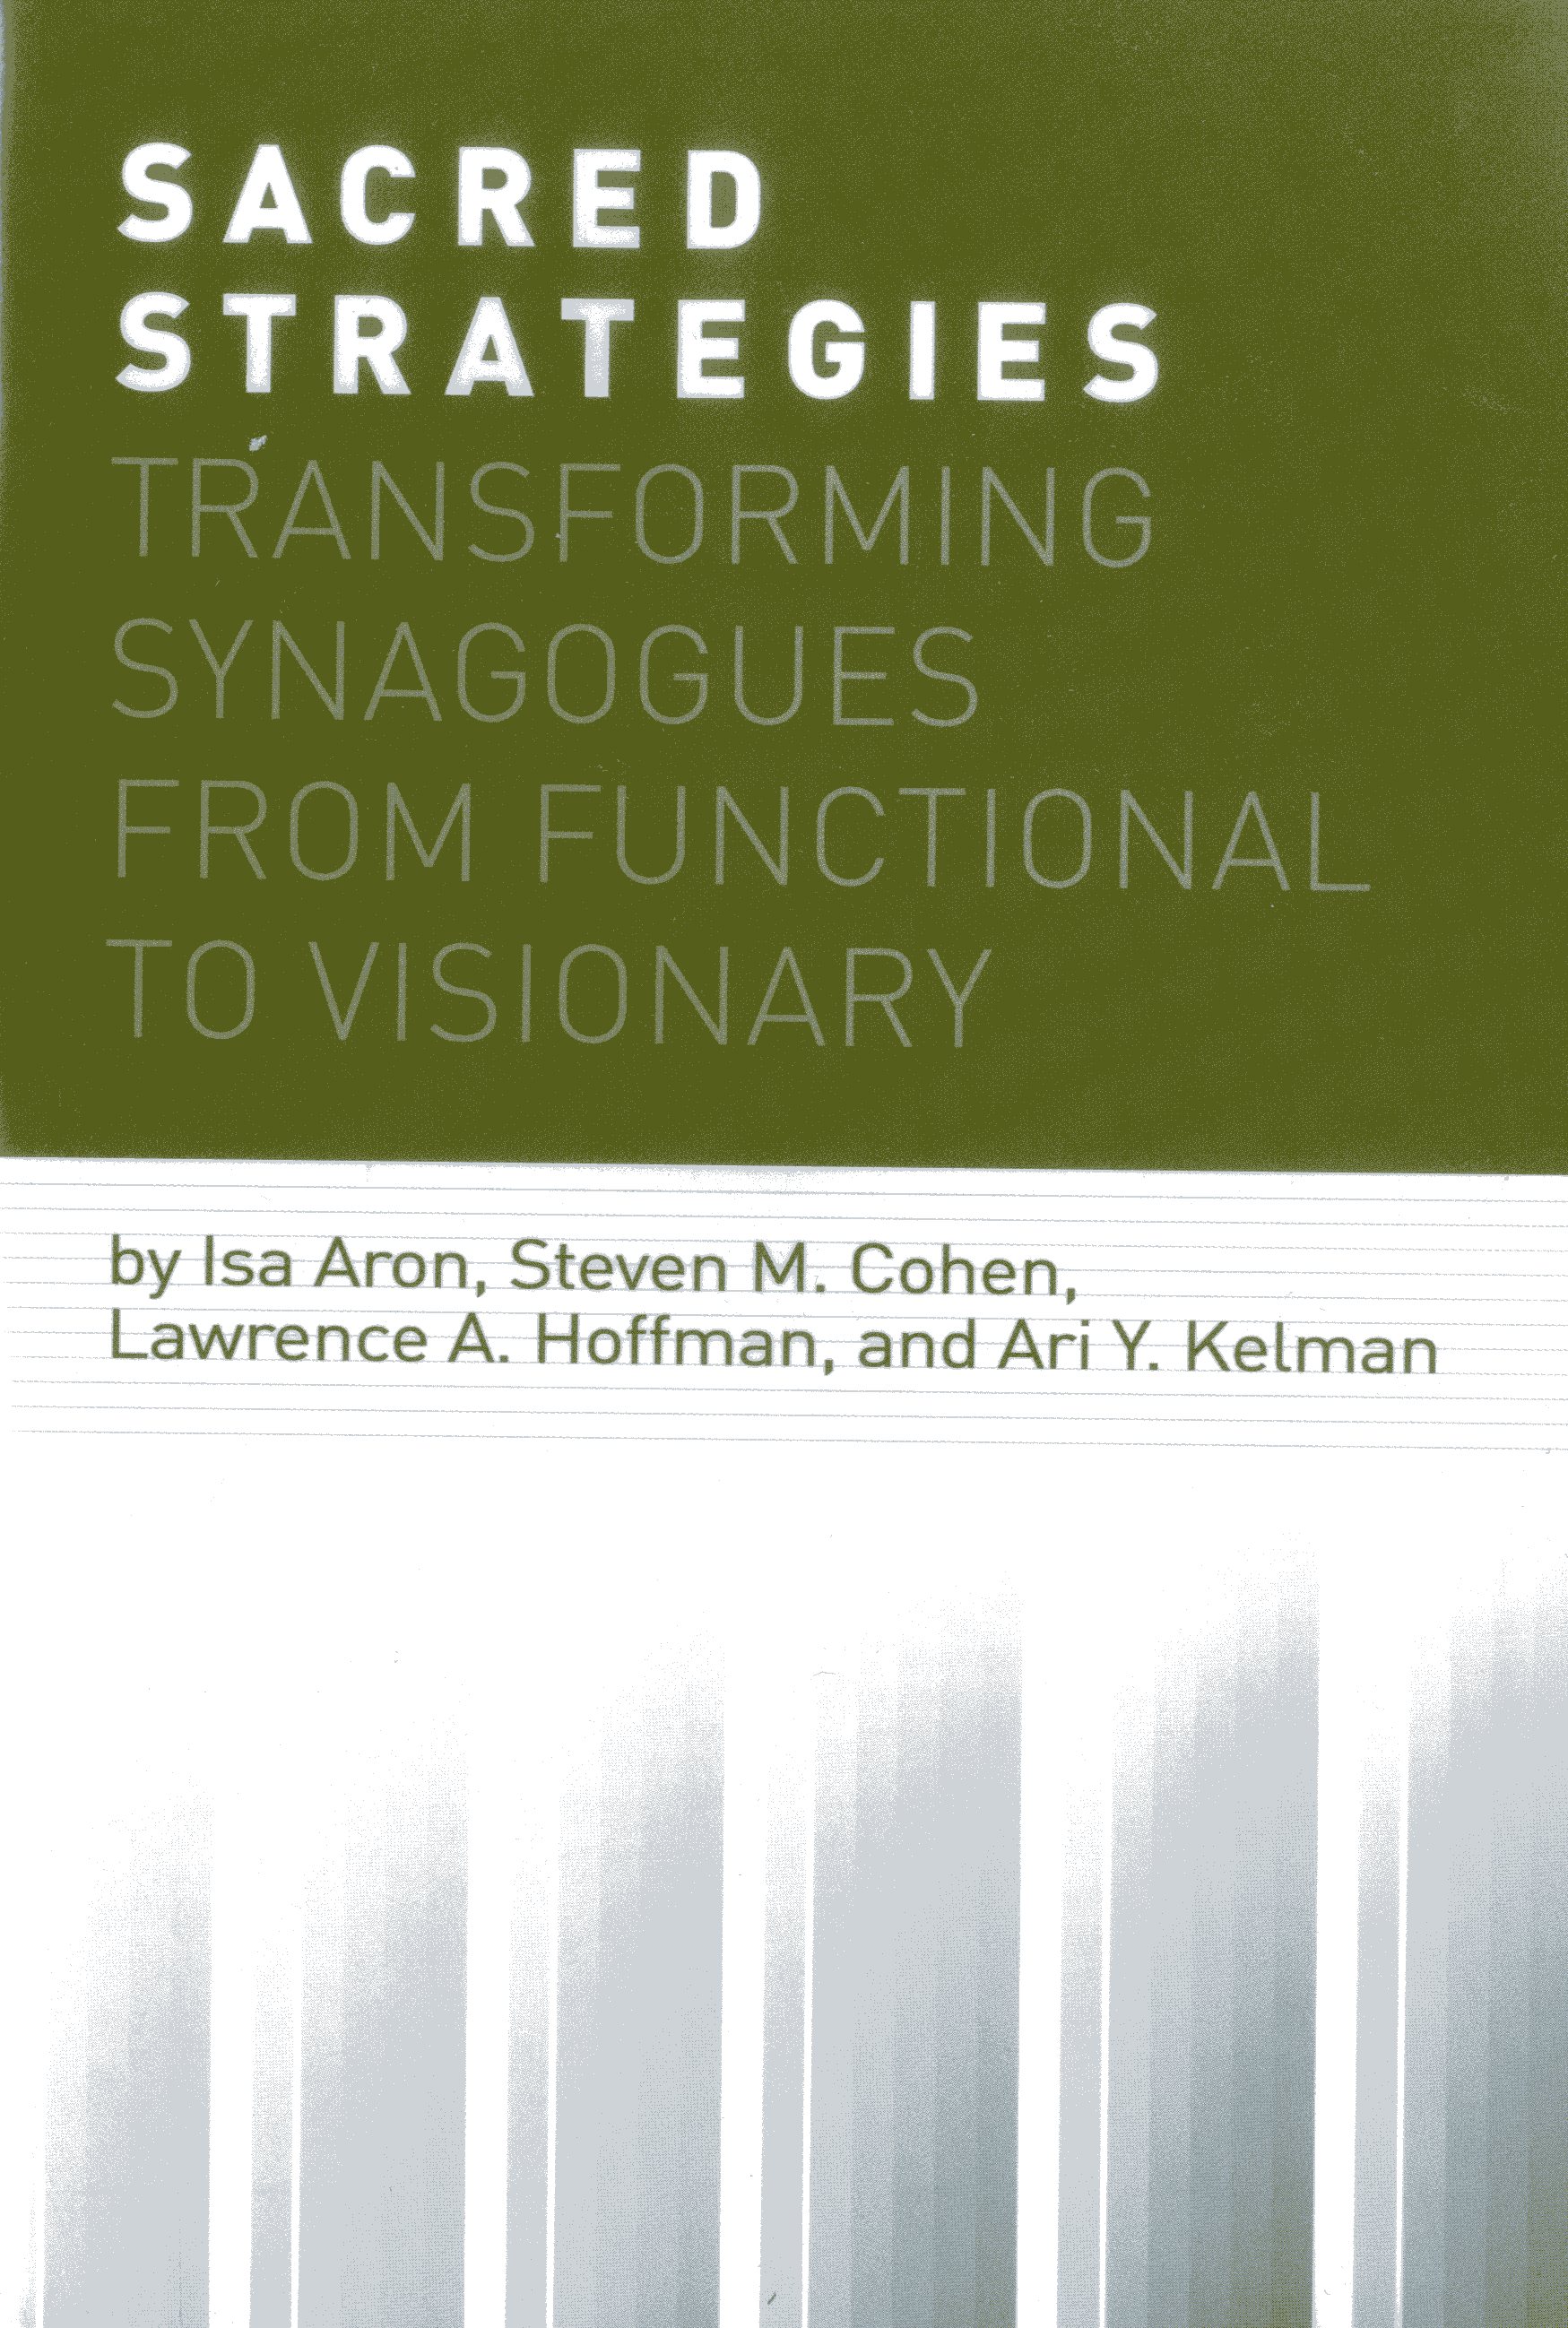 Sacred Strategies: Transforming Synagogues from Functional to Visionary